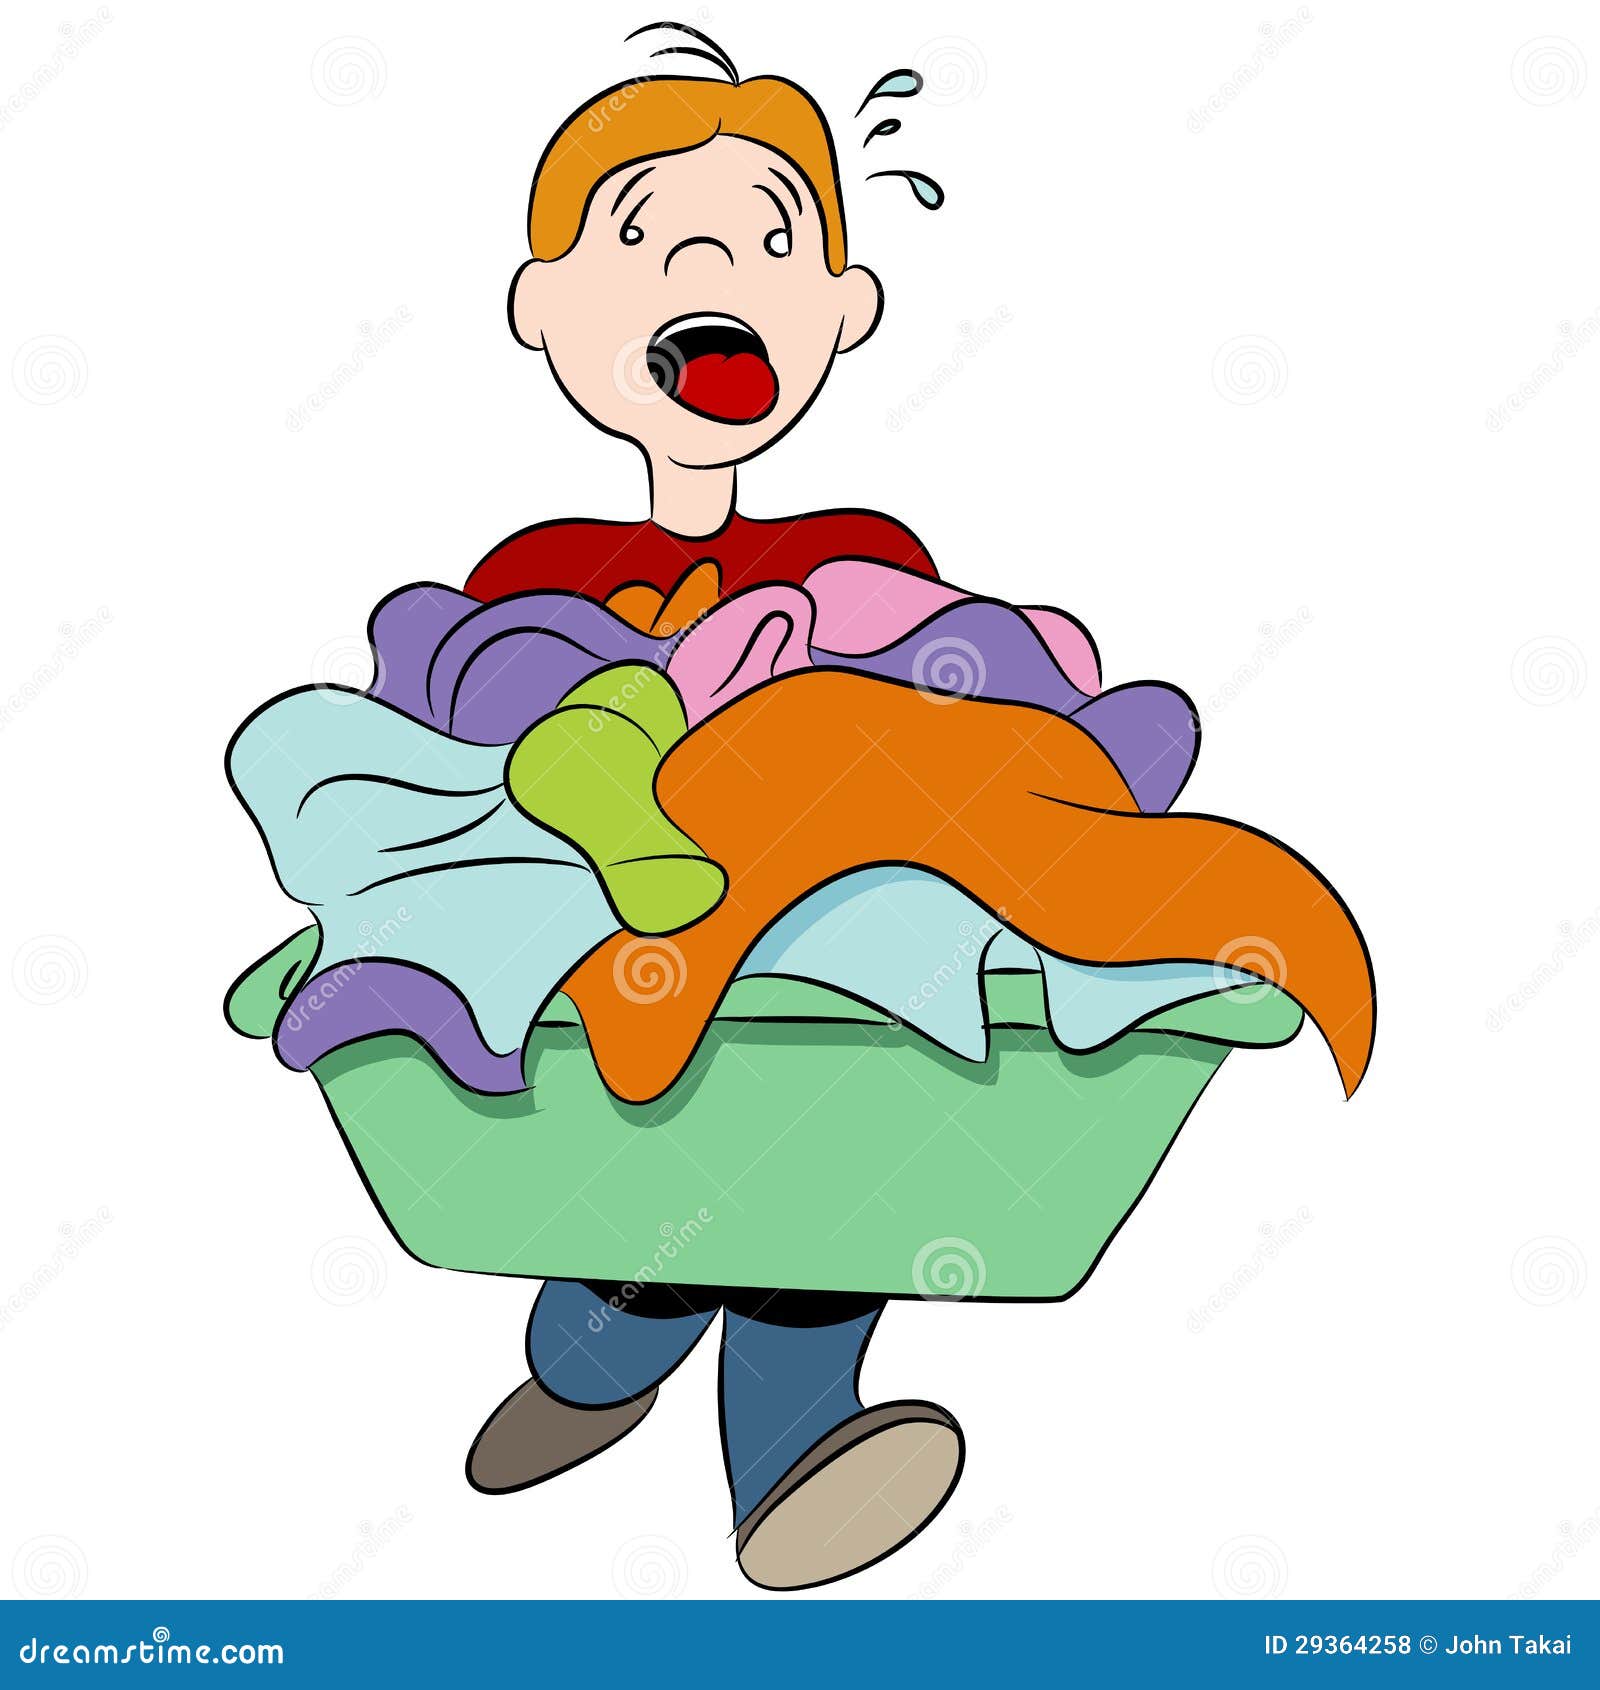 Heavy Laundry Basket stock vector. Image of sweating - 29364258